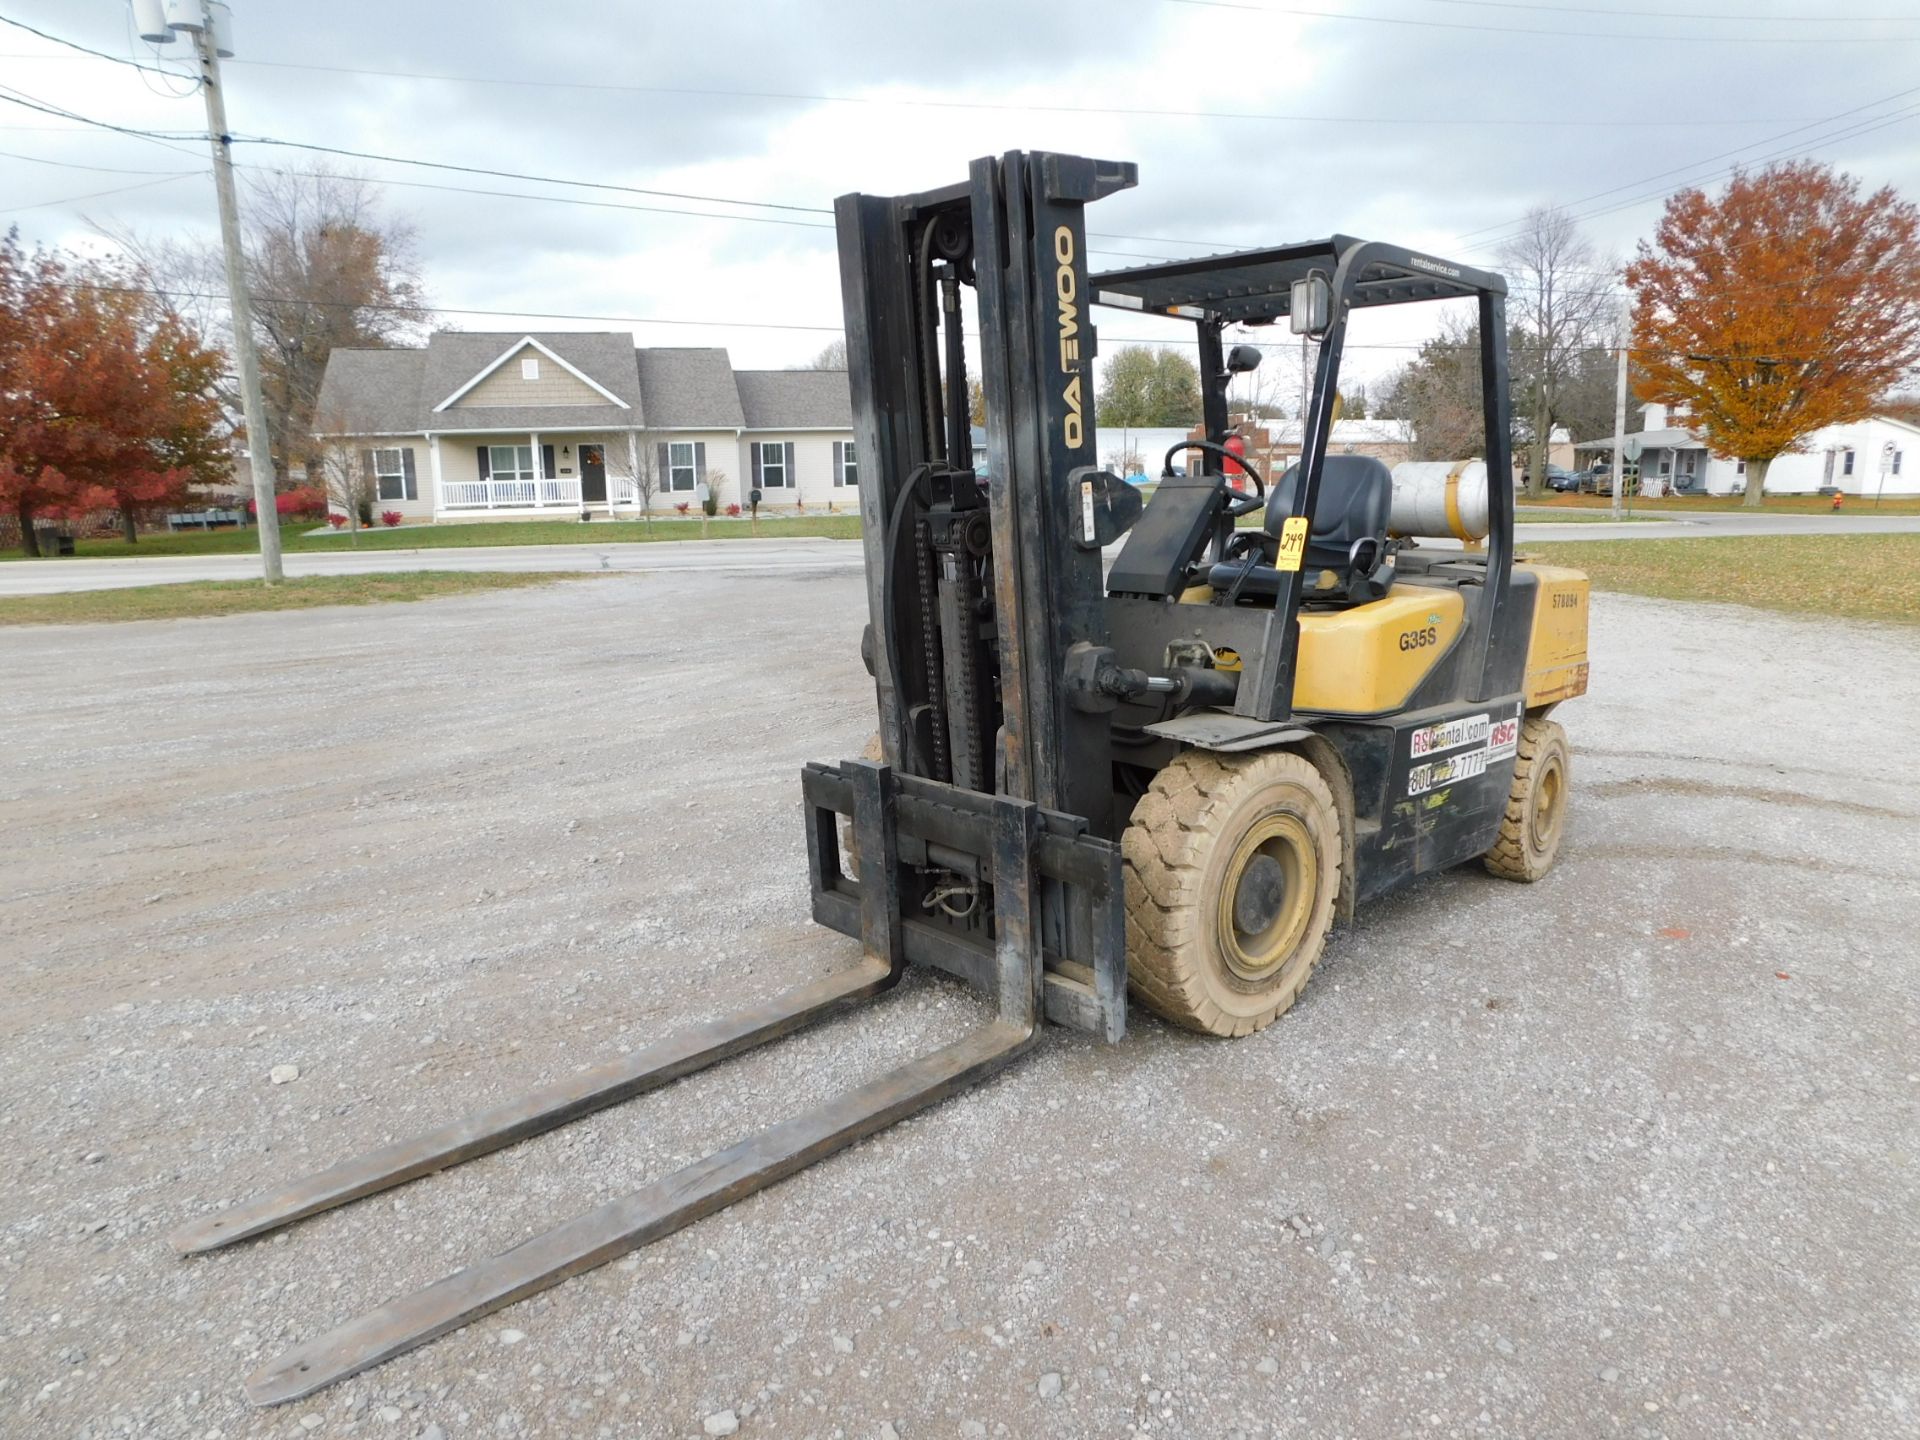 Daewoo Model G35S-2 Forklift, SN G2-00191, 6,700 lb. cap., LP, Solid Pneumatic Non-Marking Tires, - Image 2 of 20